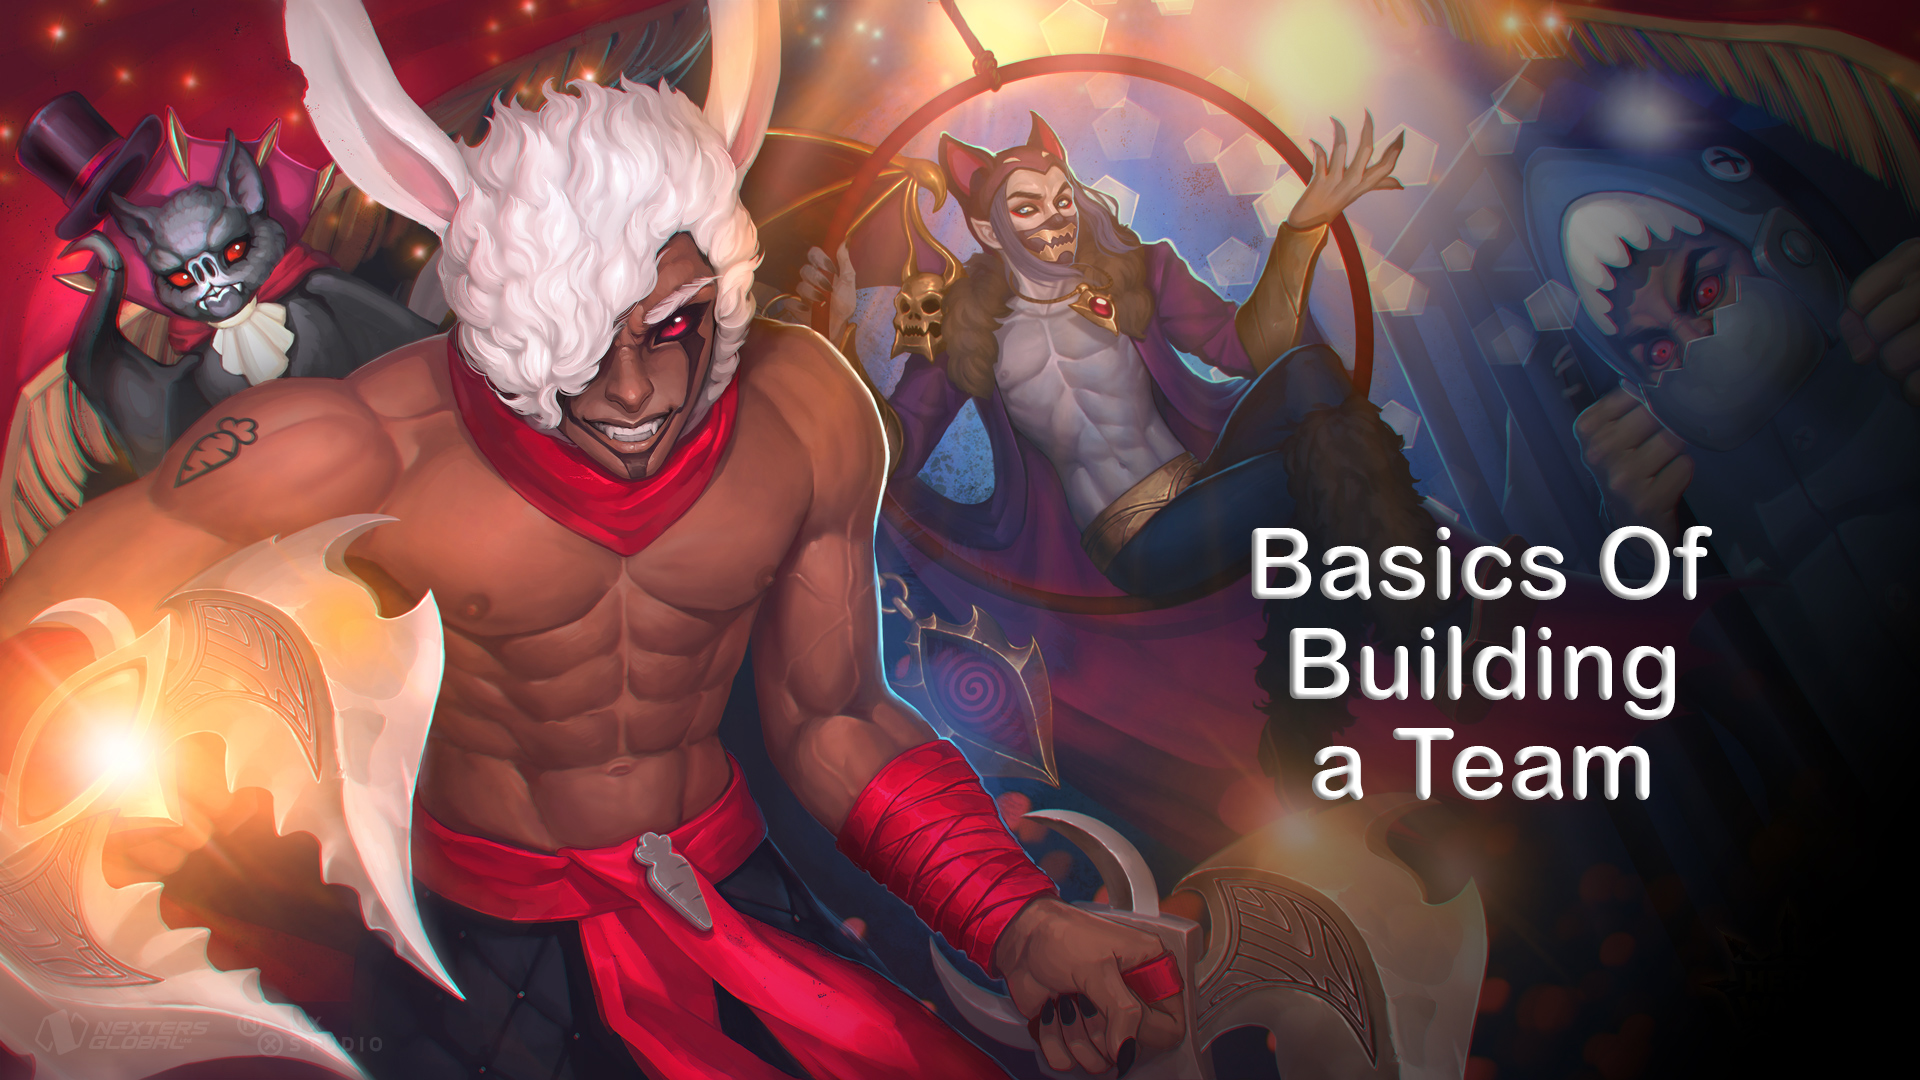 You are currently viewing Hero Wars Basic Team | Basics of Building a Team